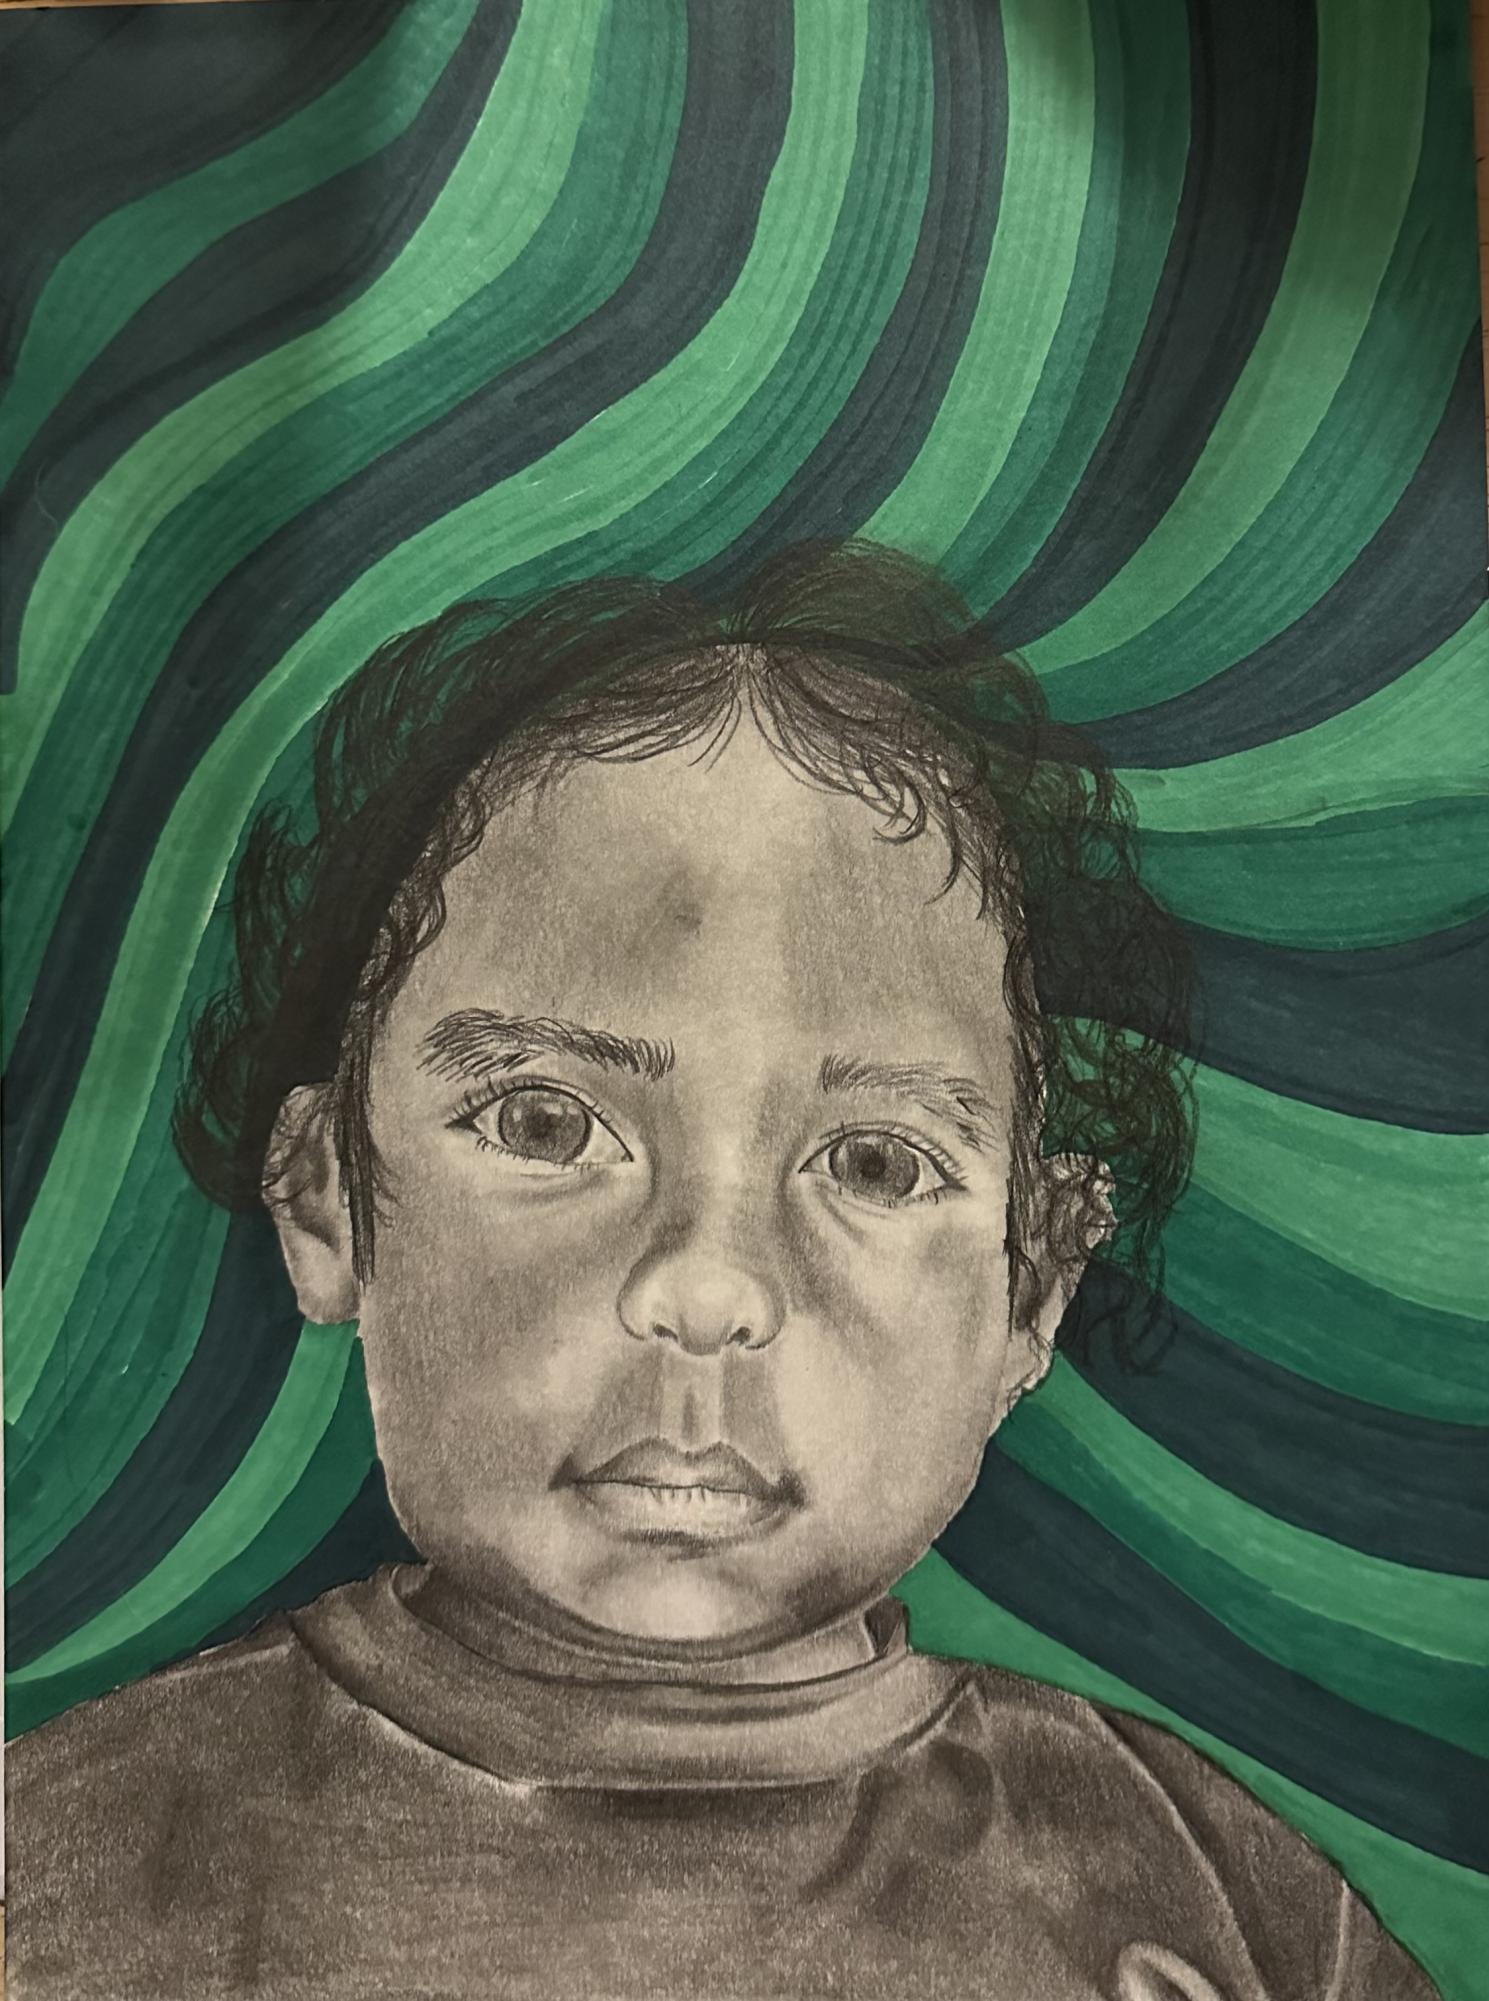 Junior Stella Colocinos memory project drawing, showcasing the little boy and a background in his favorite color, green.
